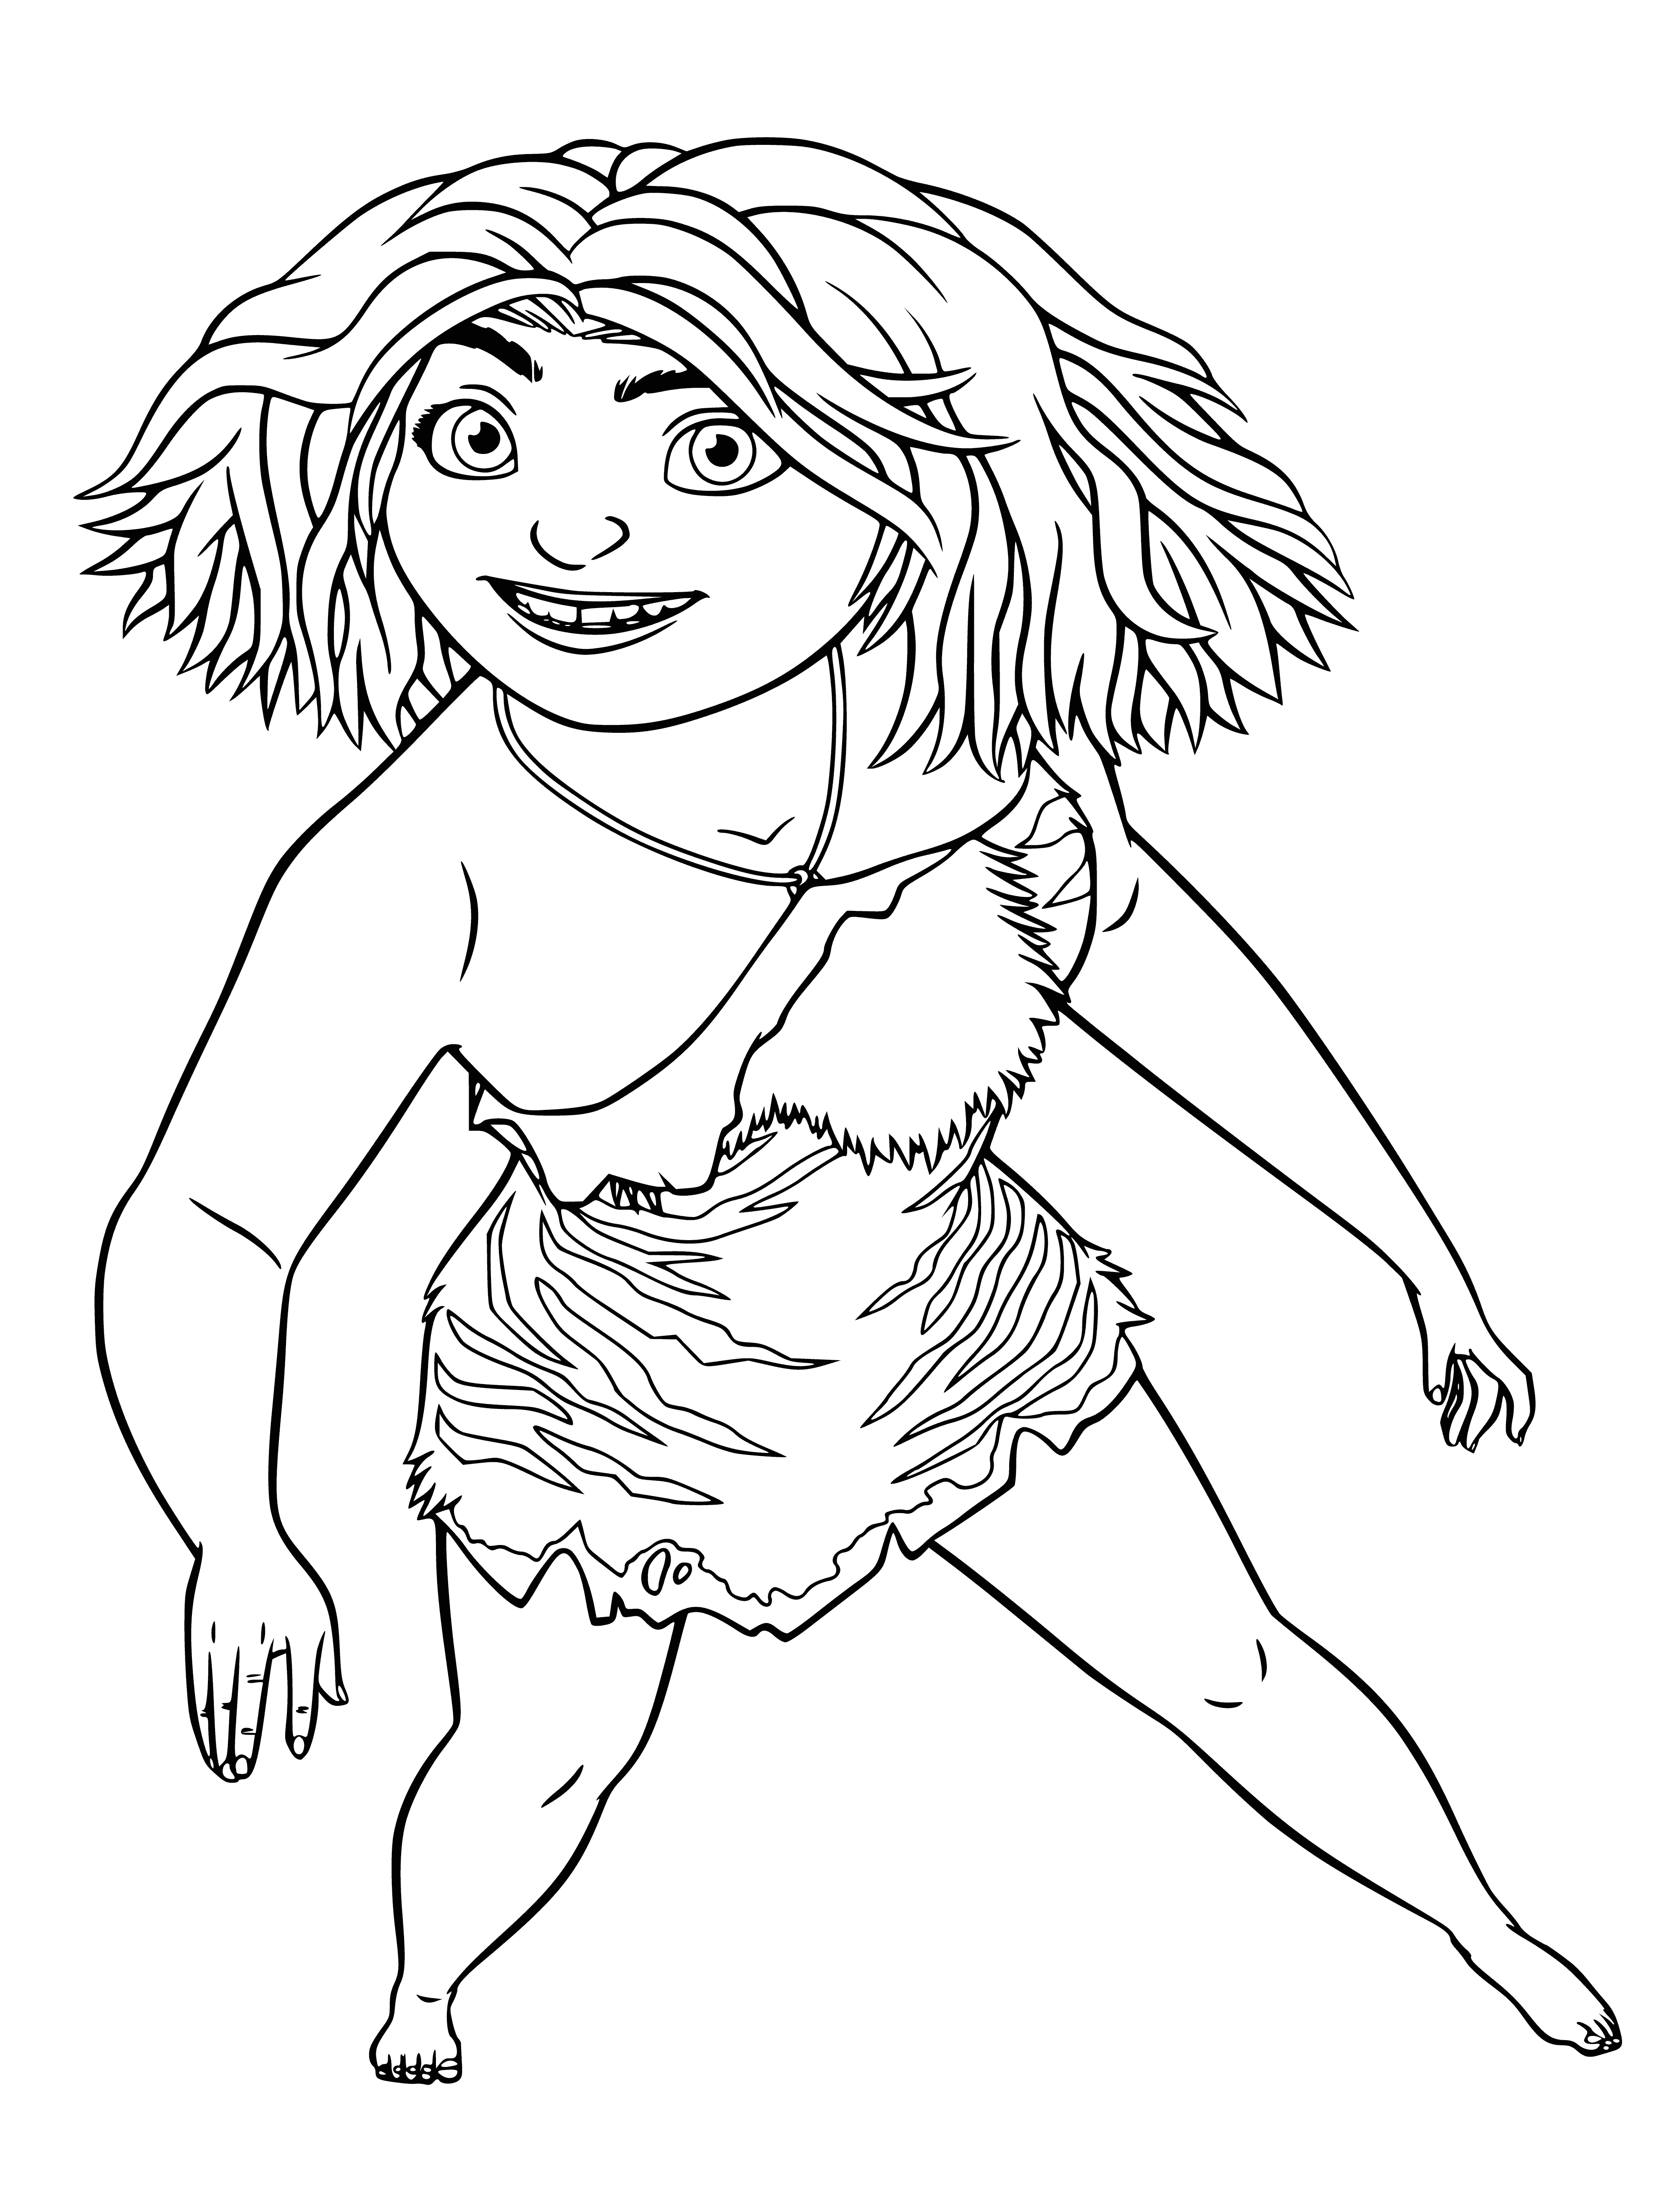 coloring page: Gip is a Caveman; small, skinny, big head, big eyes, lots of hair, wearing a loincloth, standing in front of a fire smiling.